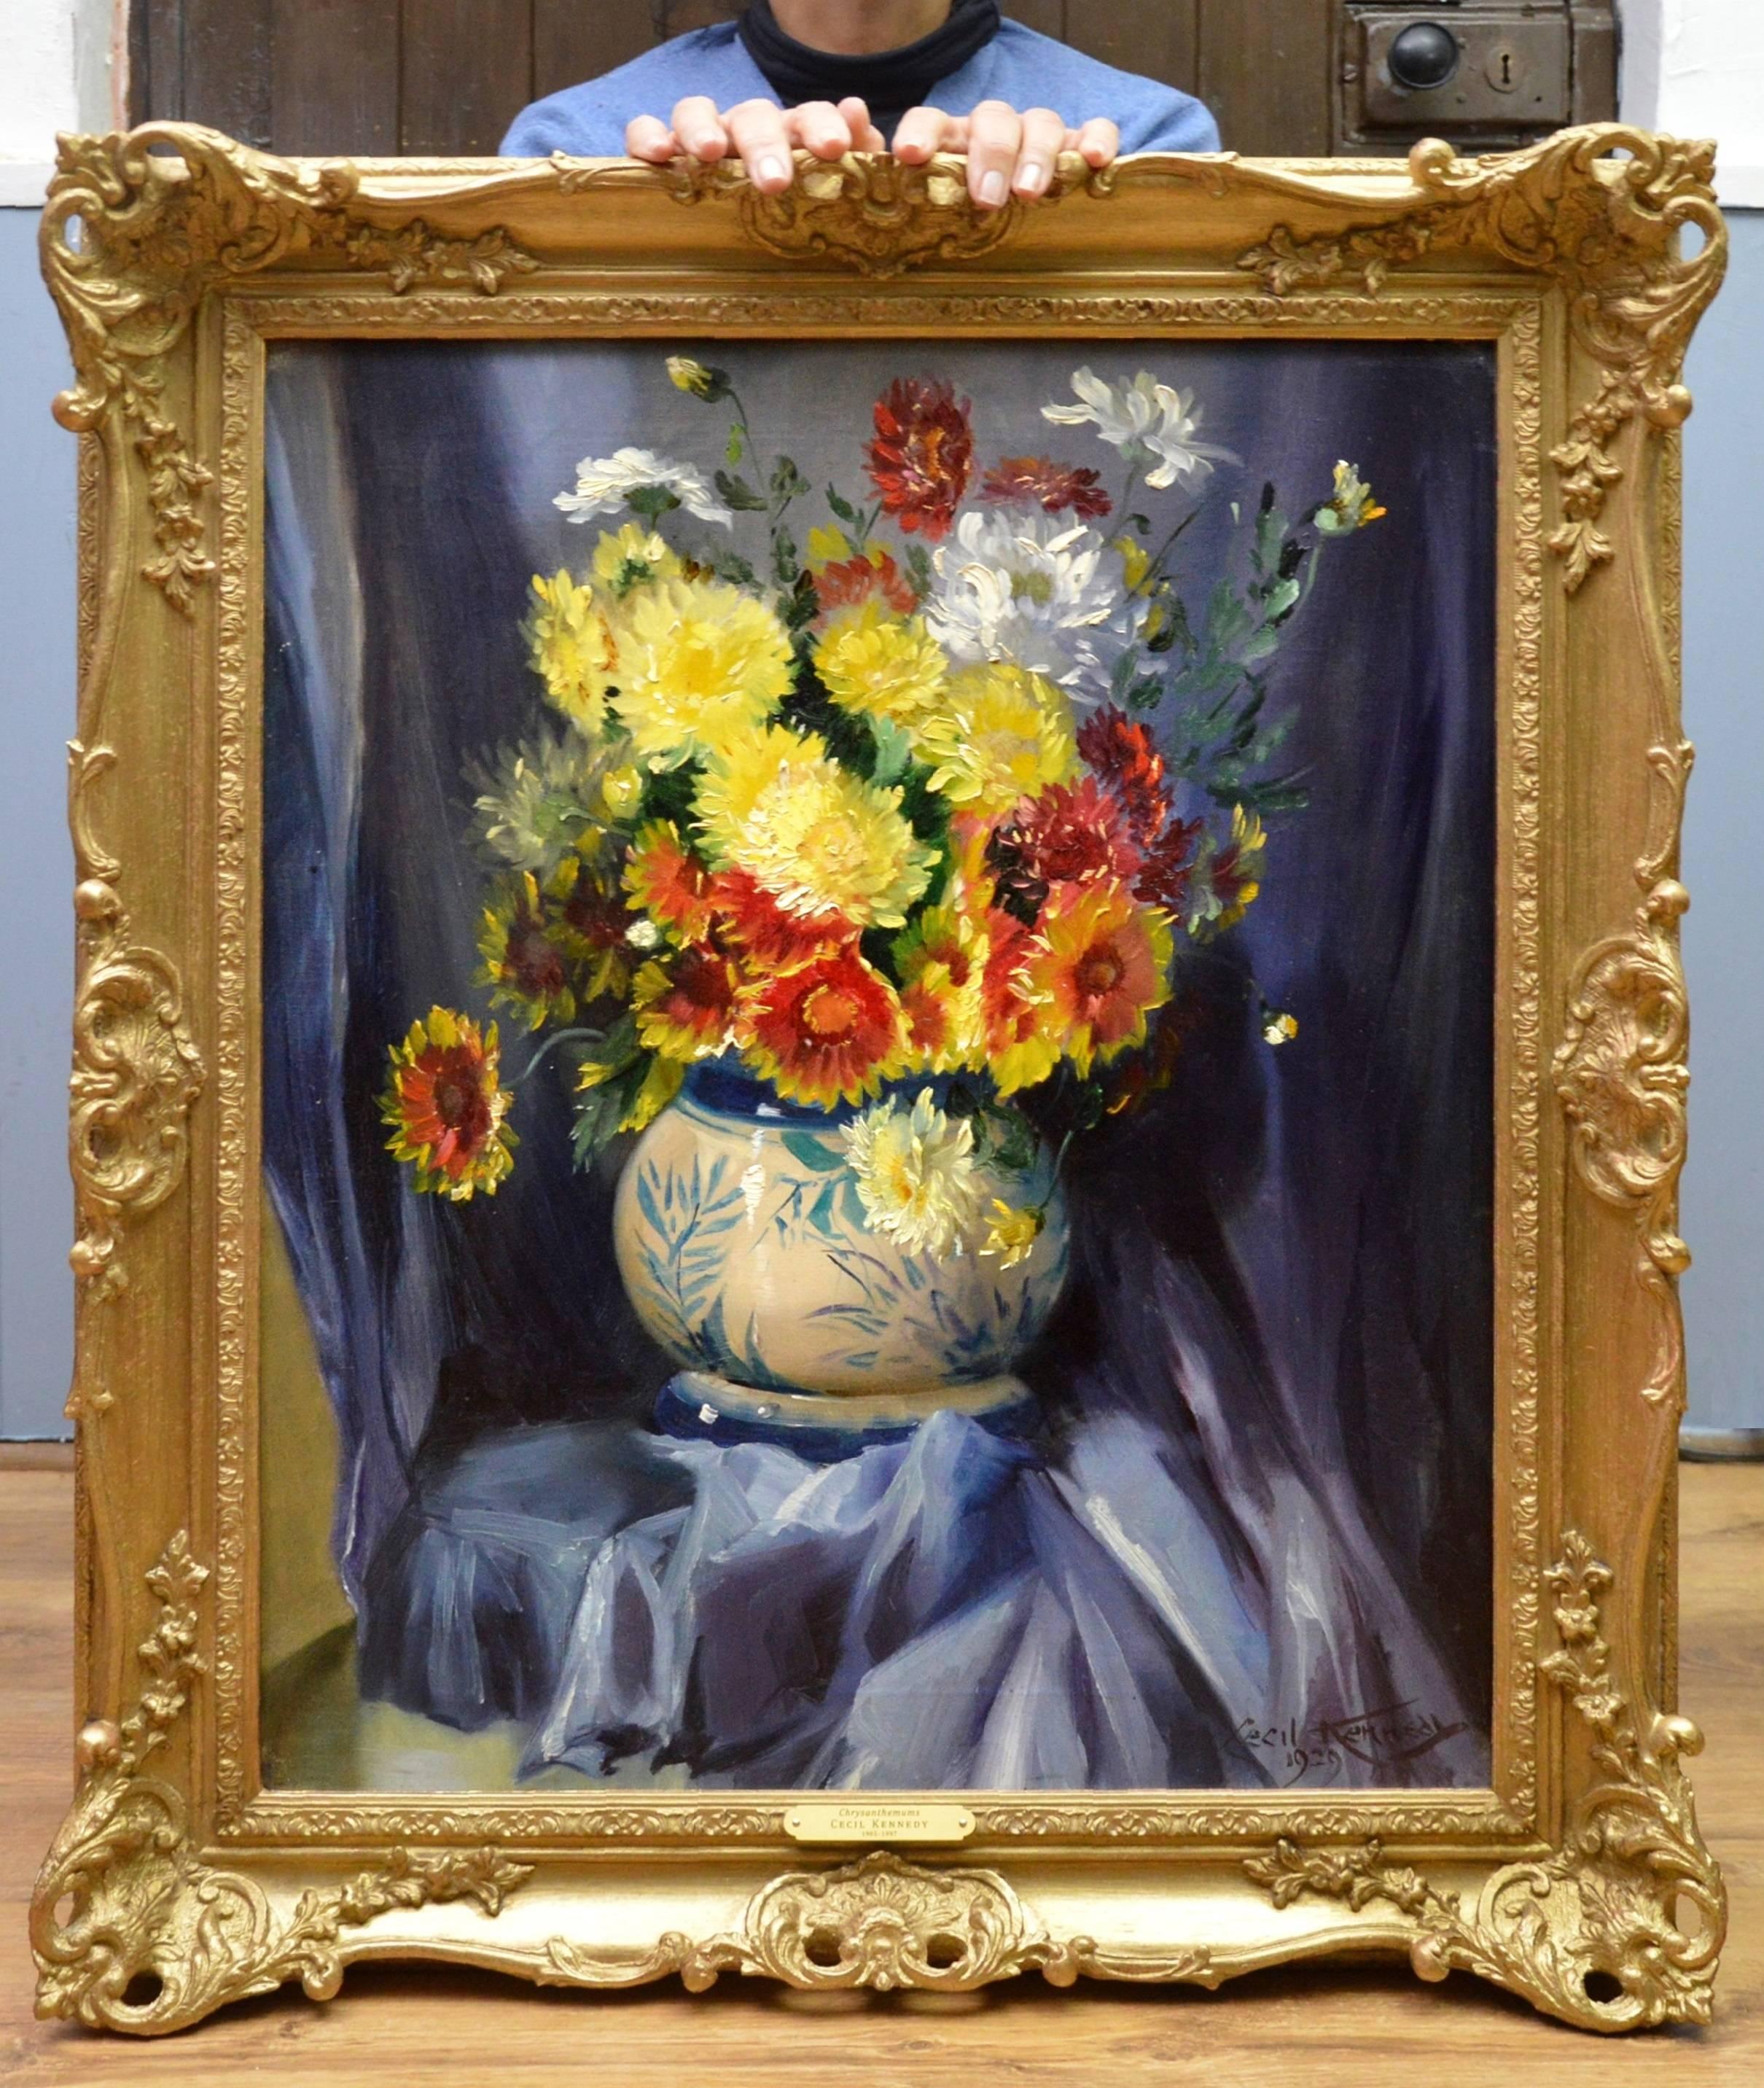 This is a large fine original floral still life oil painting of ‘Chrysanthemums’ in a blue and white Chinese bowl by the famous British artist Cecil Kennedy (1905-1997). The painting is signed by the artist and dated 1929 and is as striking a work